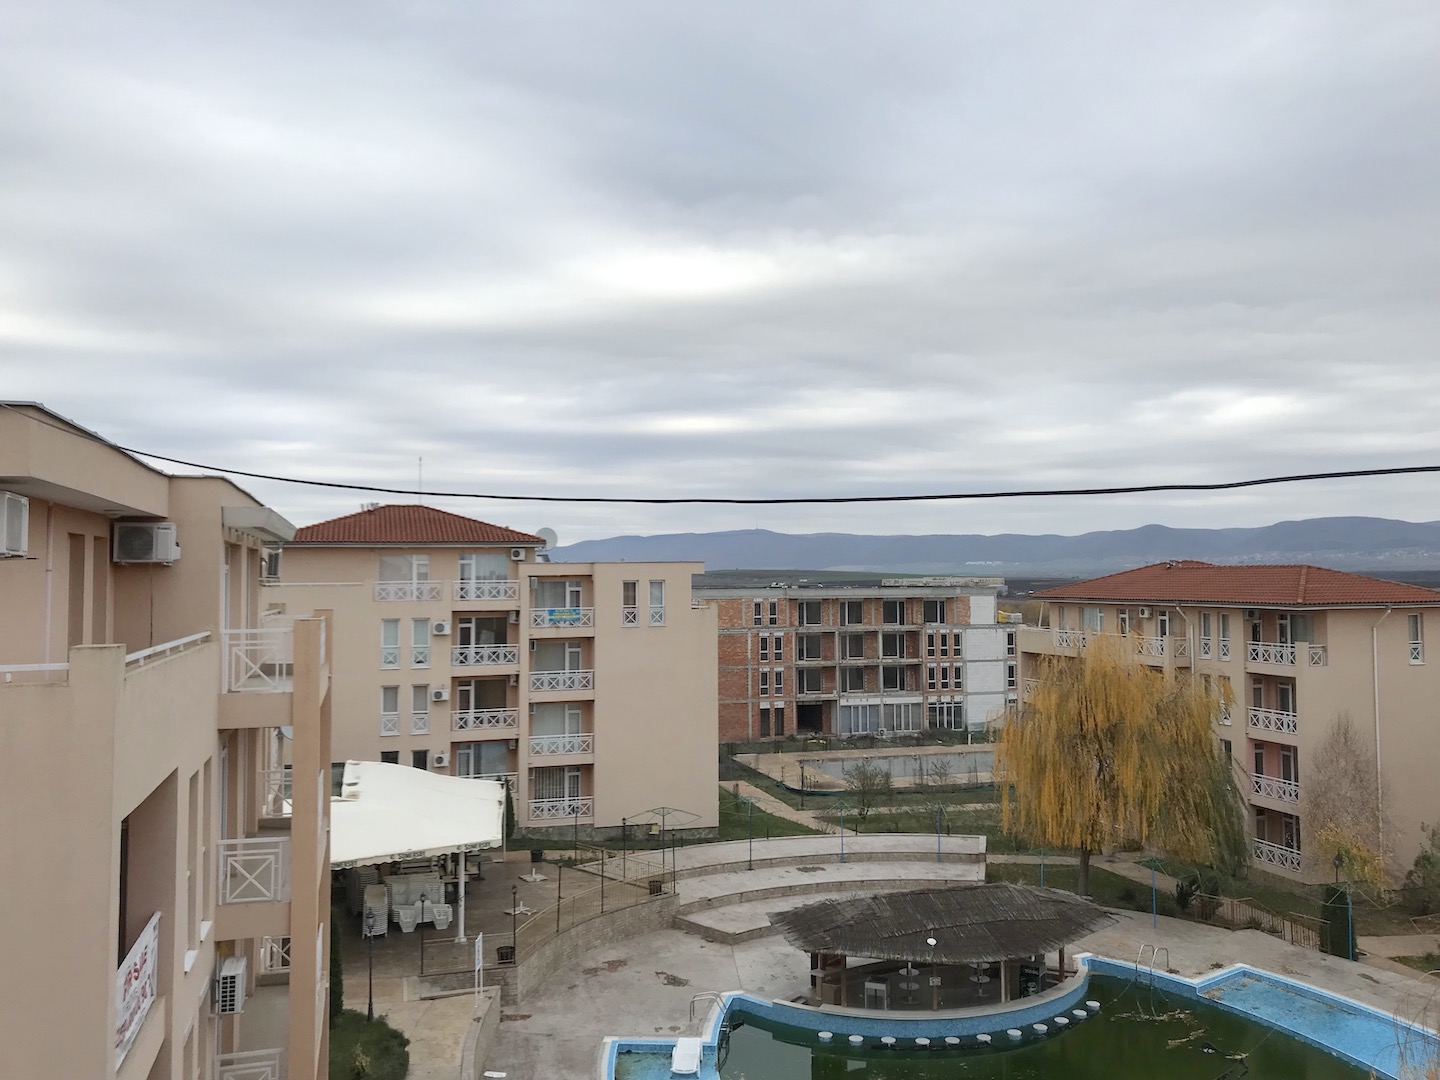 RL-2432 Apartment for Sale in Burgas, Sunny Beach Resort - € 27,500